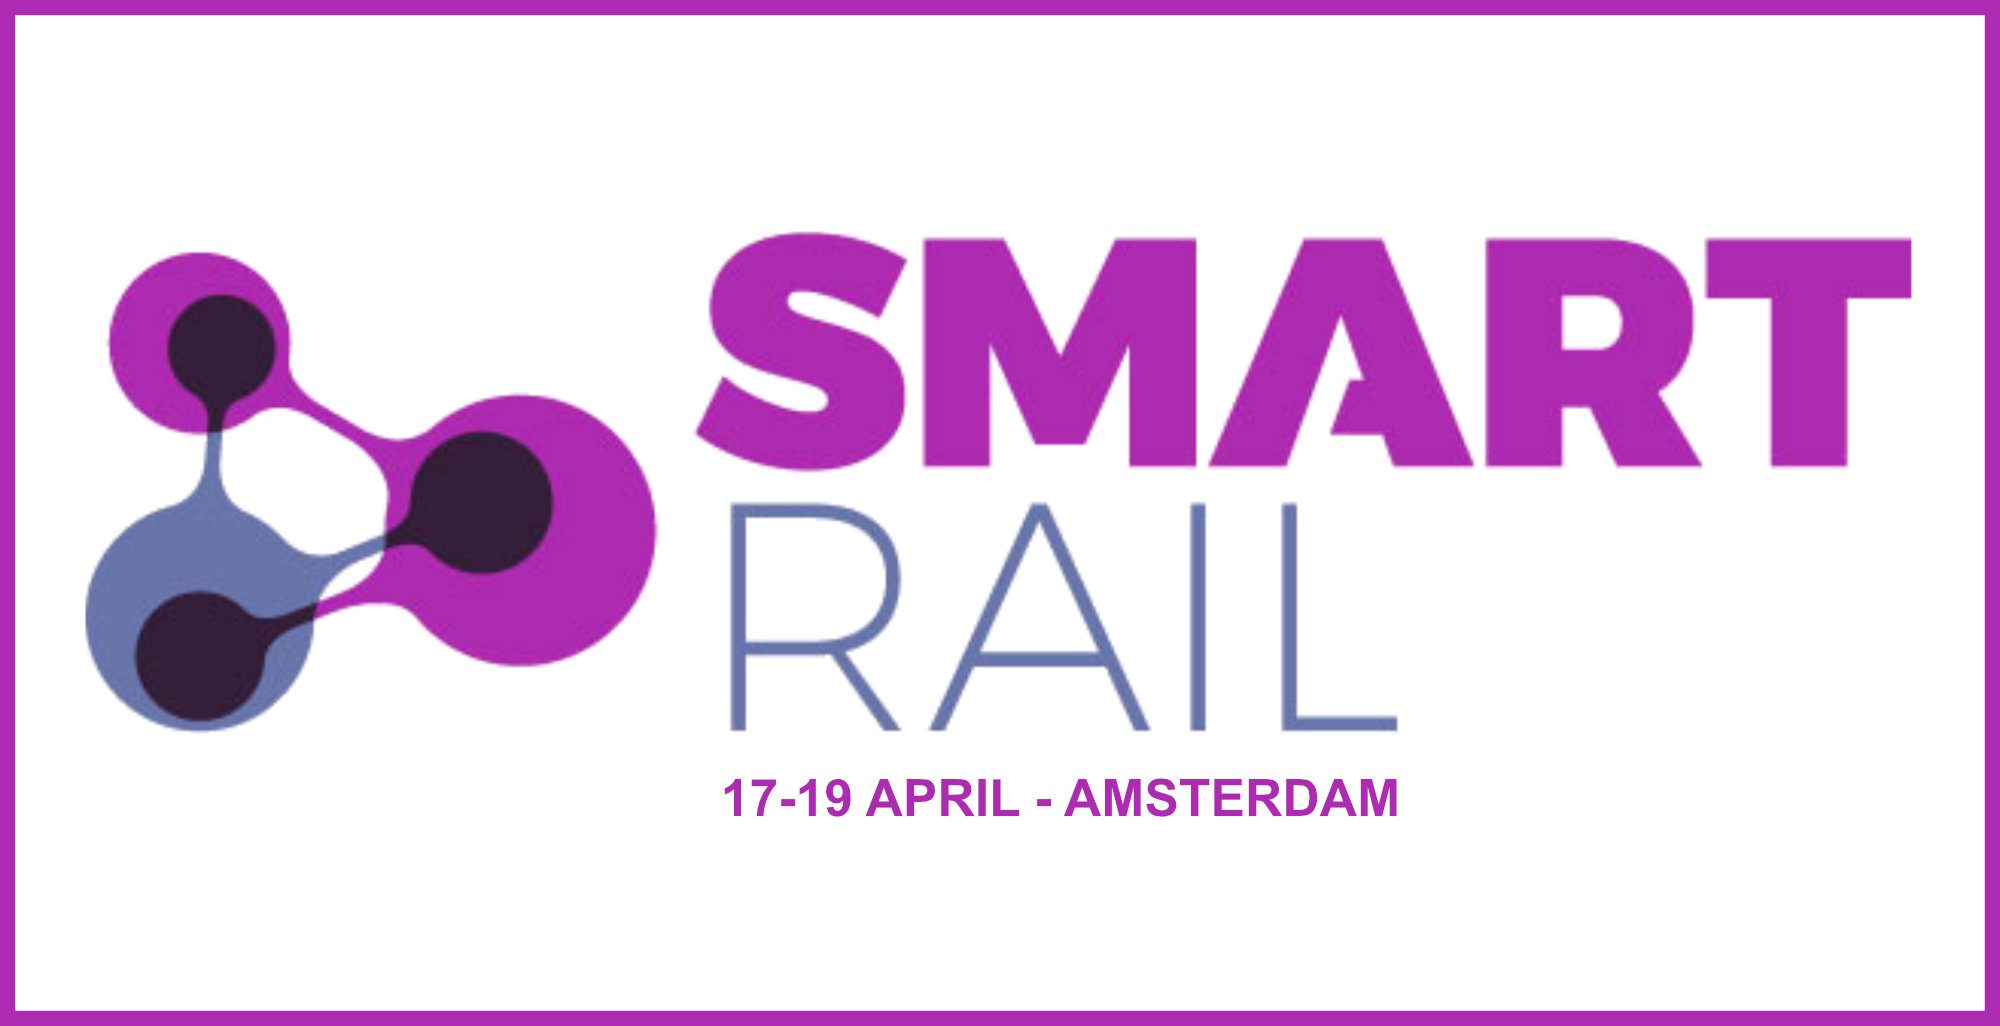 Icomera to Exhibit at SmartRail Europe 2018 in Amsterdam